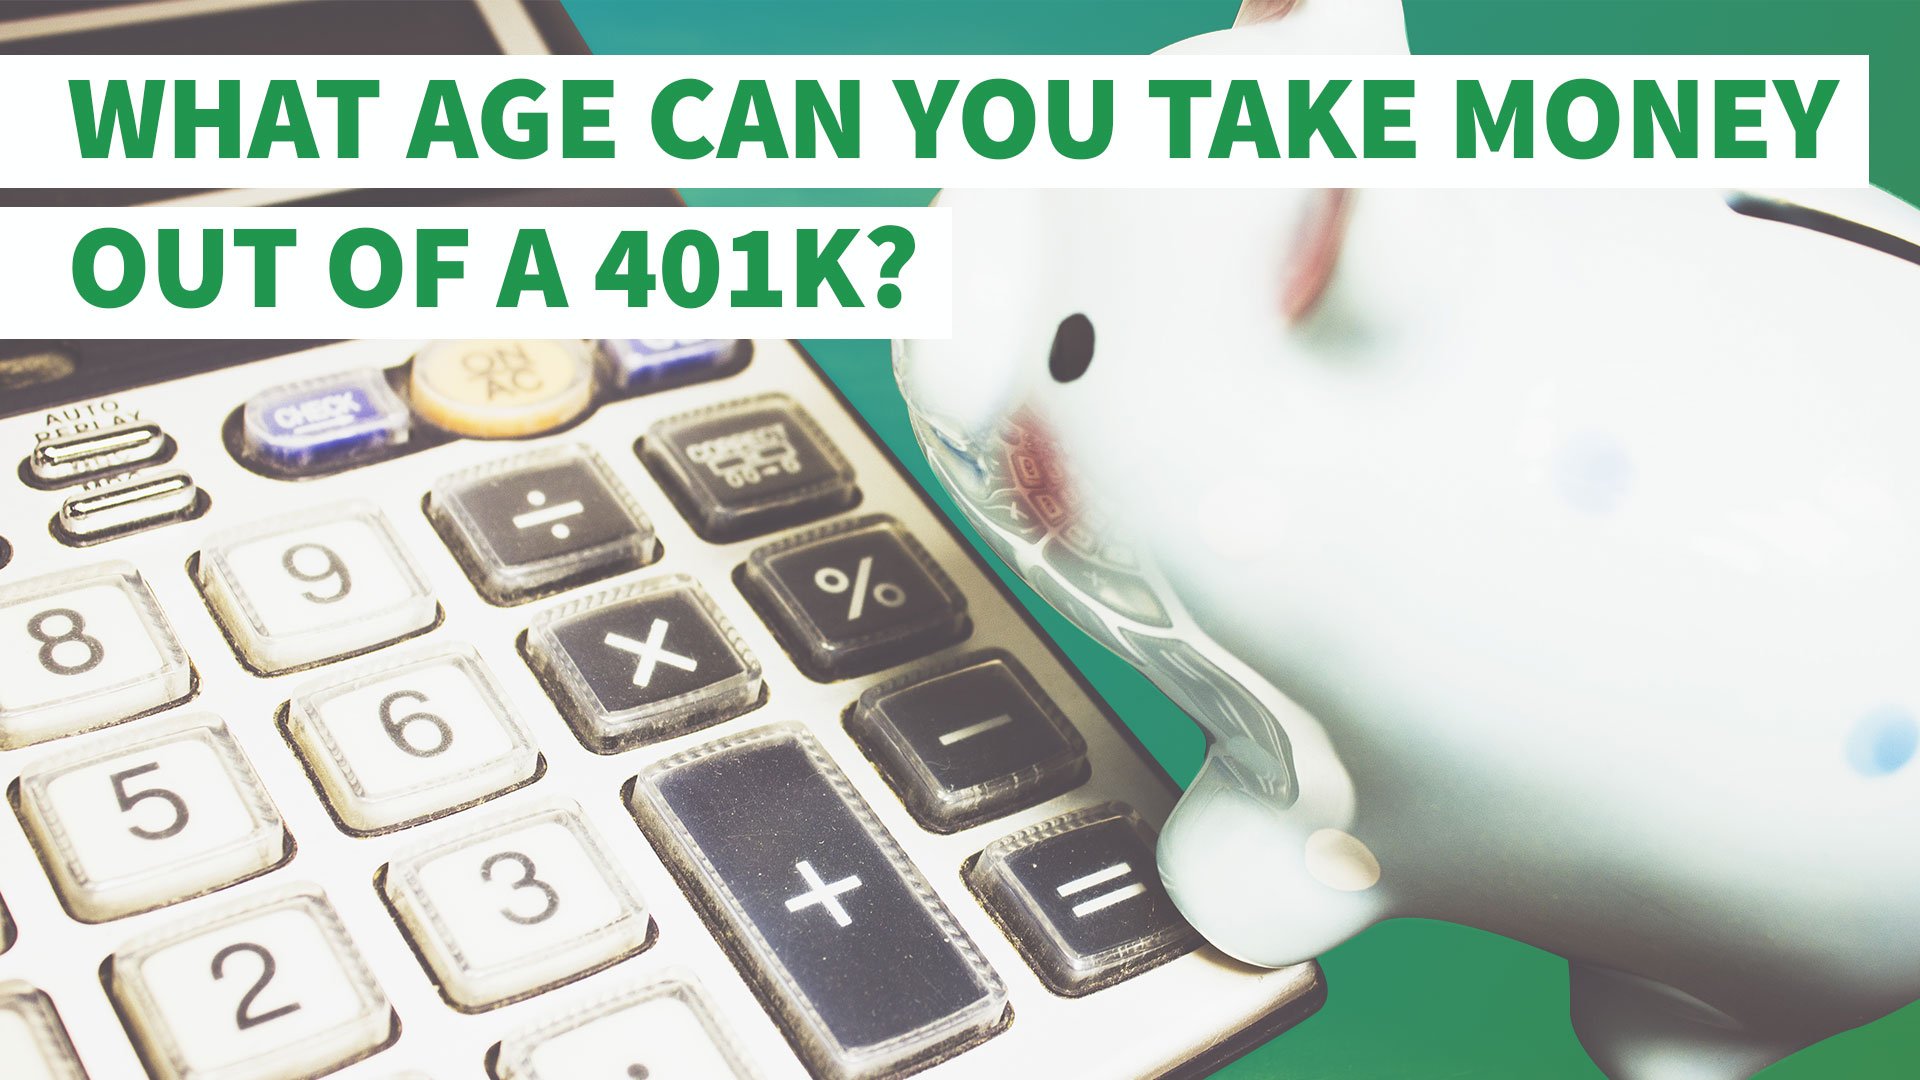 What Age Can You Take Money Out of a 401k?